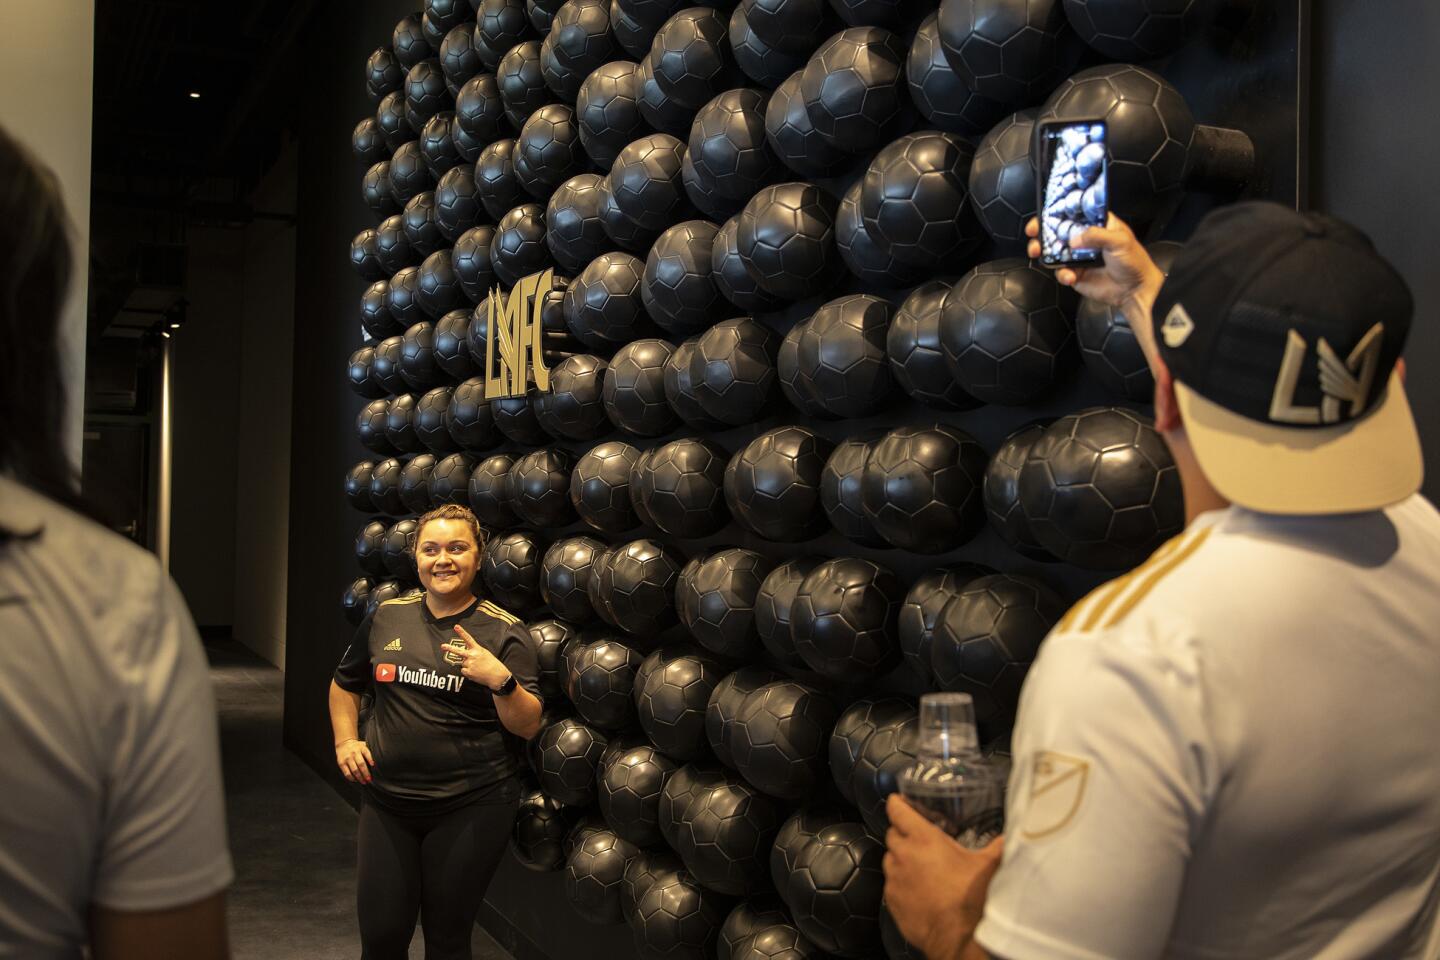 LAFC fans take selfies against a wall of soccer balls at the Figueroa Club inside the new Banc of California Stadium on April 21.